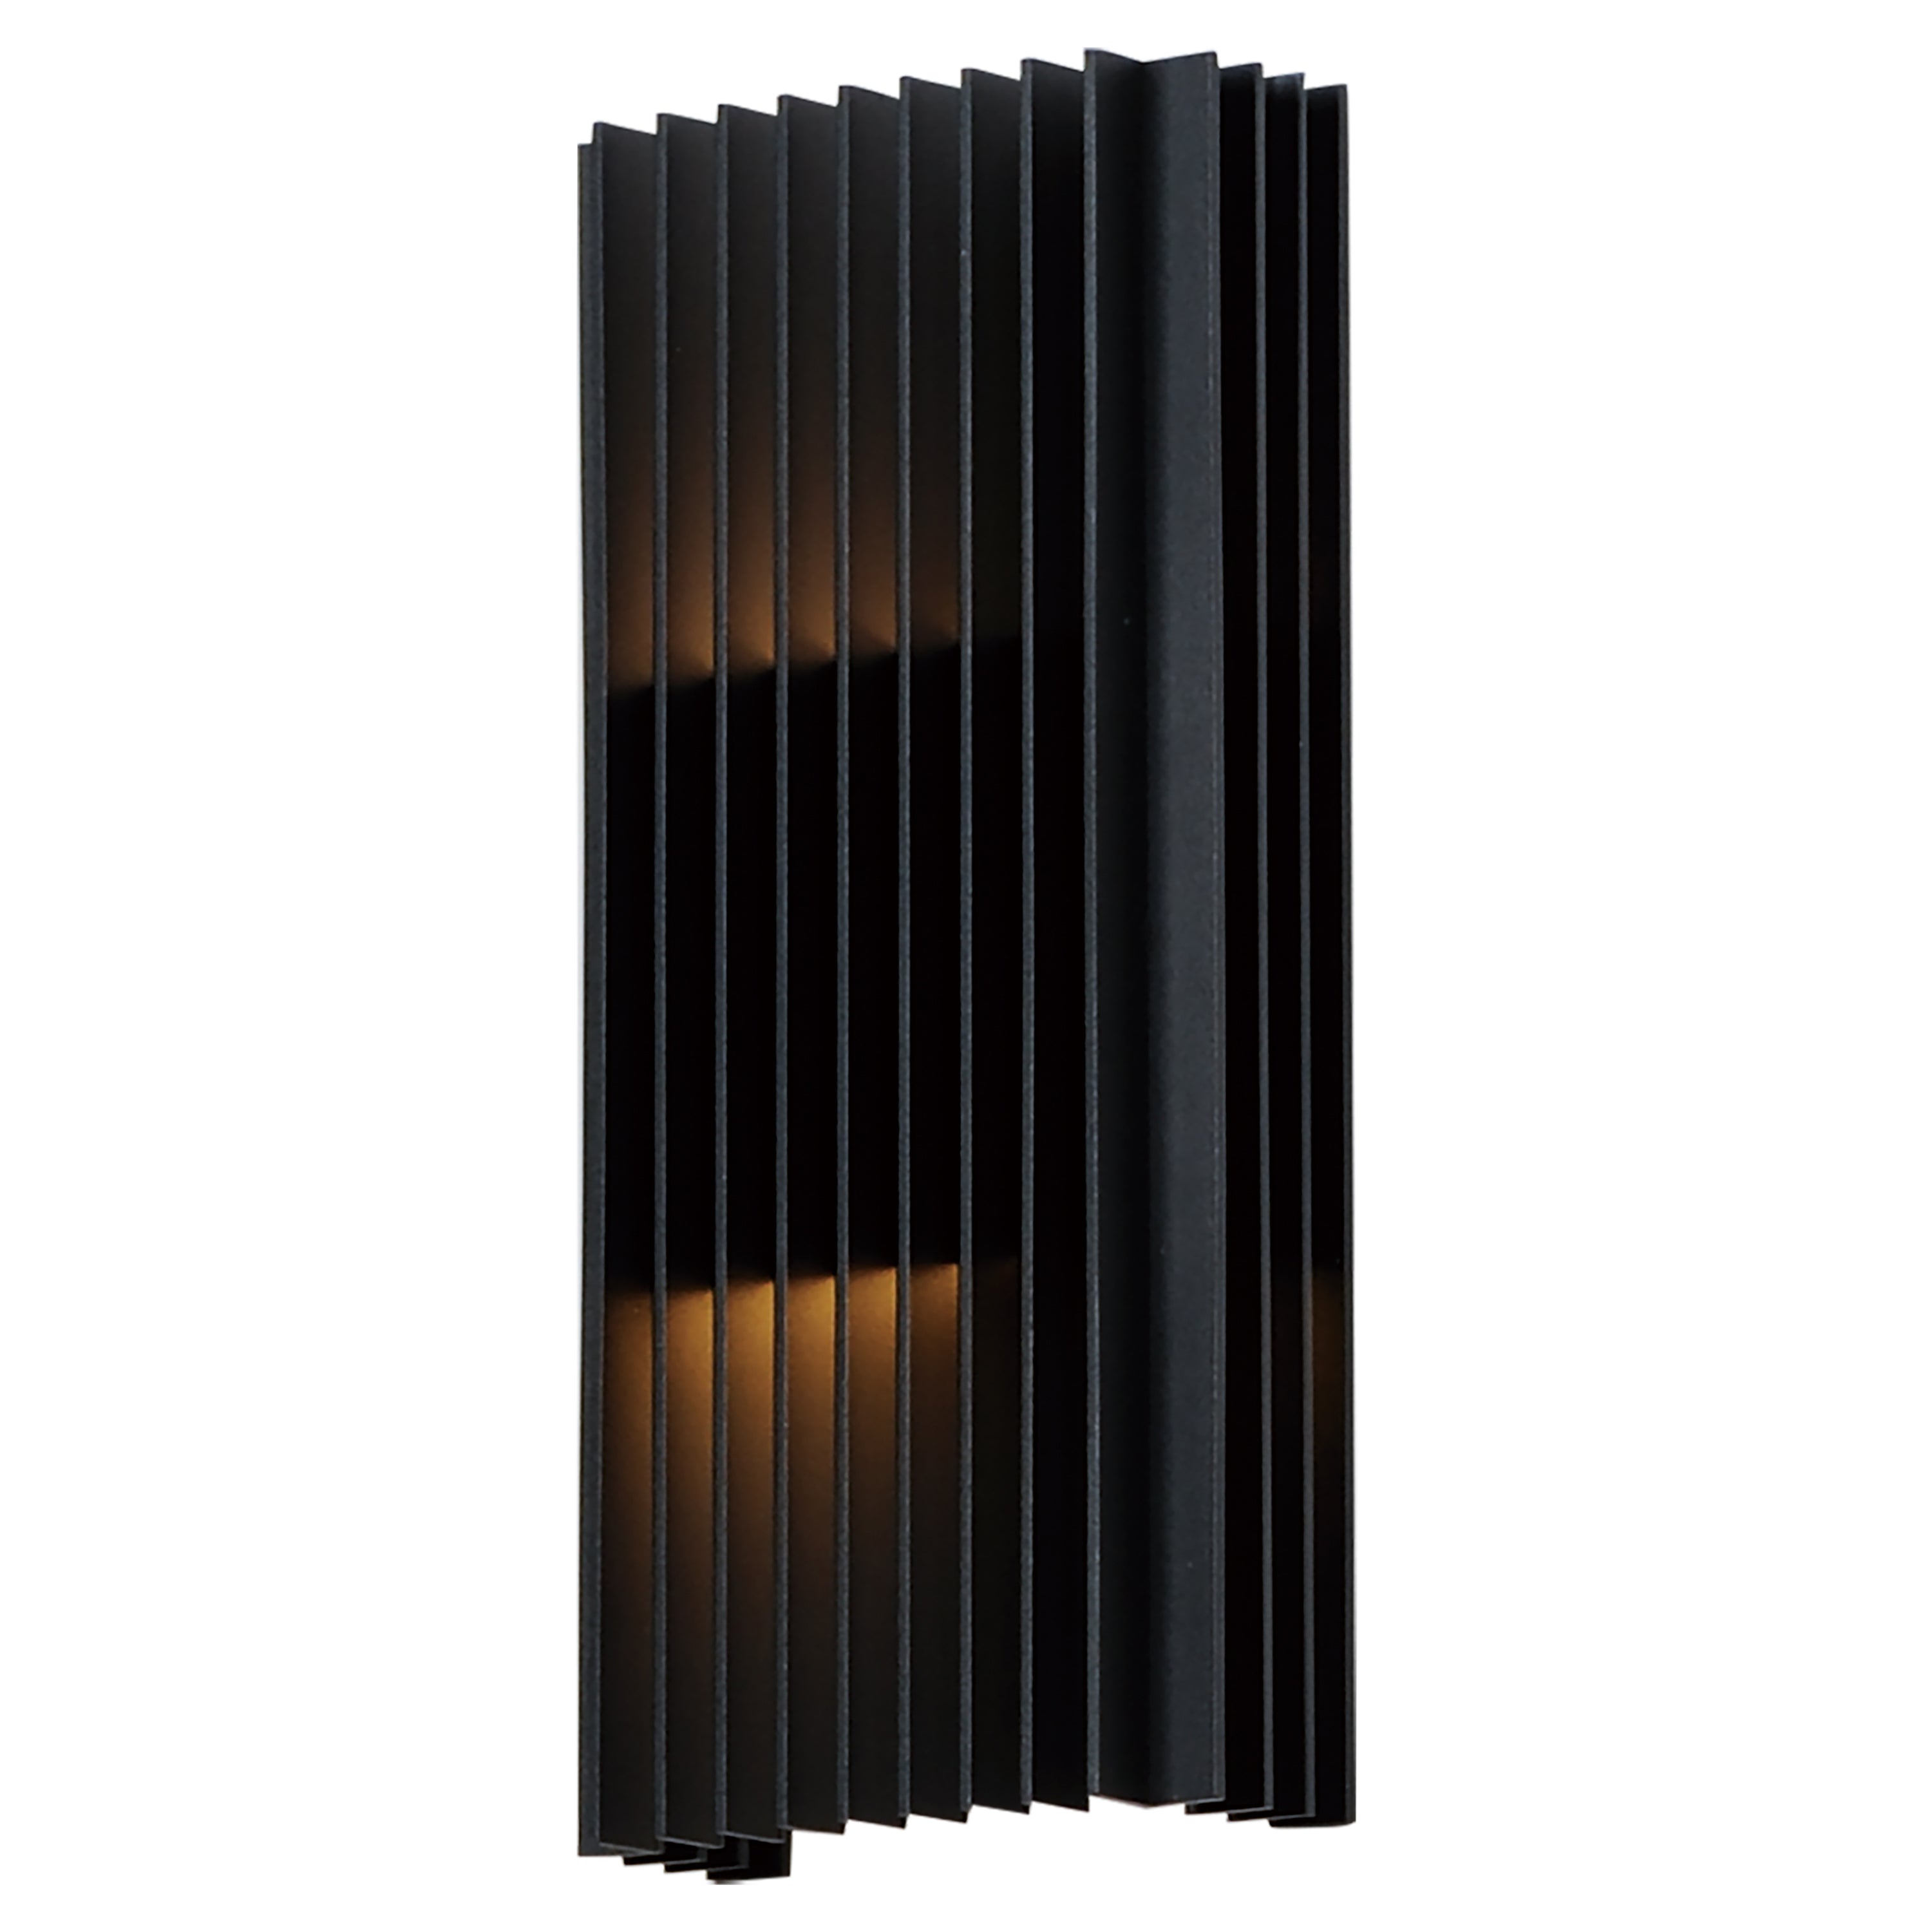 RAMPART Outdoor wall sconce Black INTEGRATED LED - E30116-BK | MAXIM/ET3